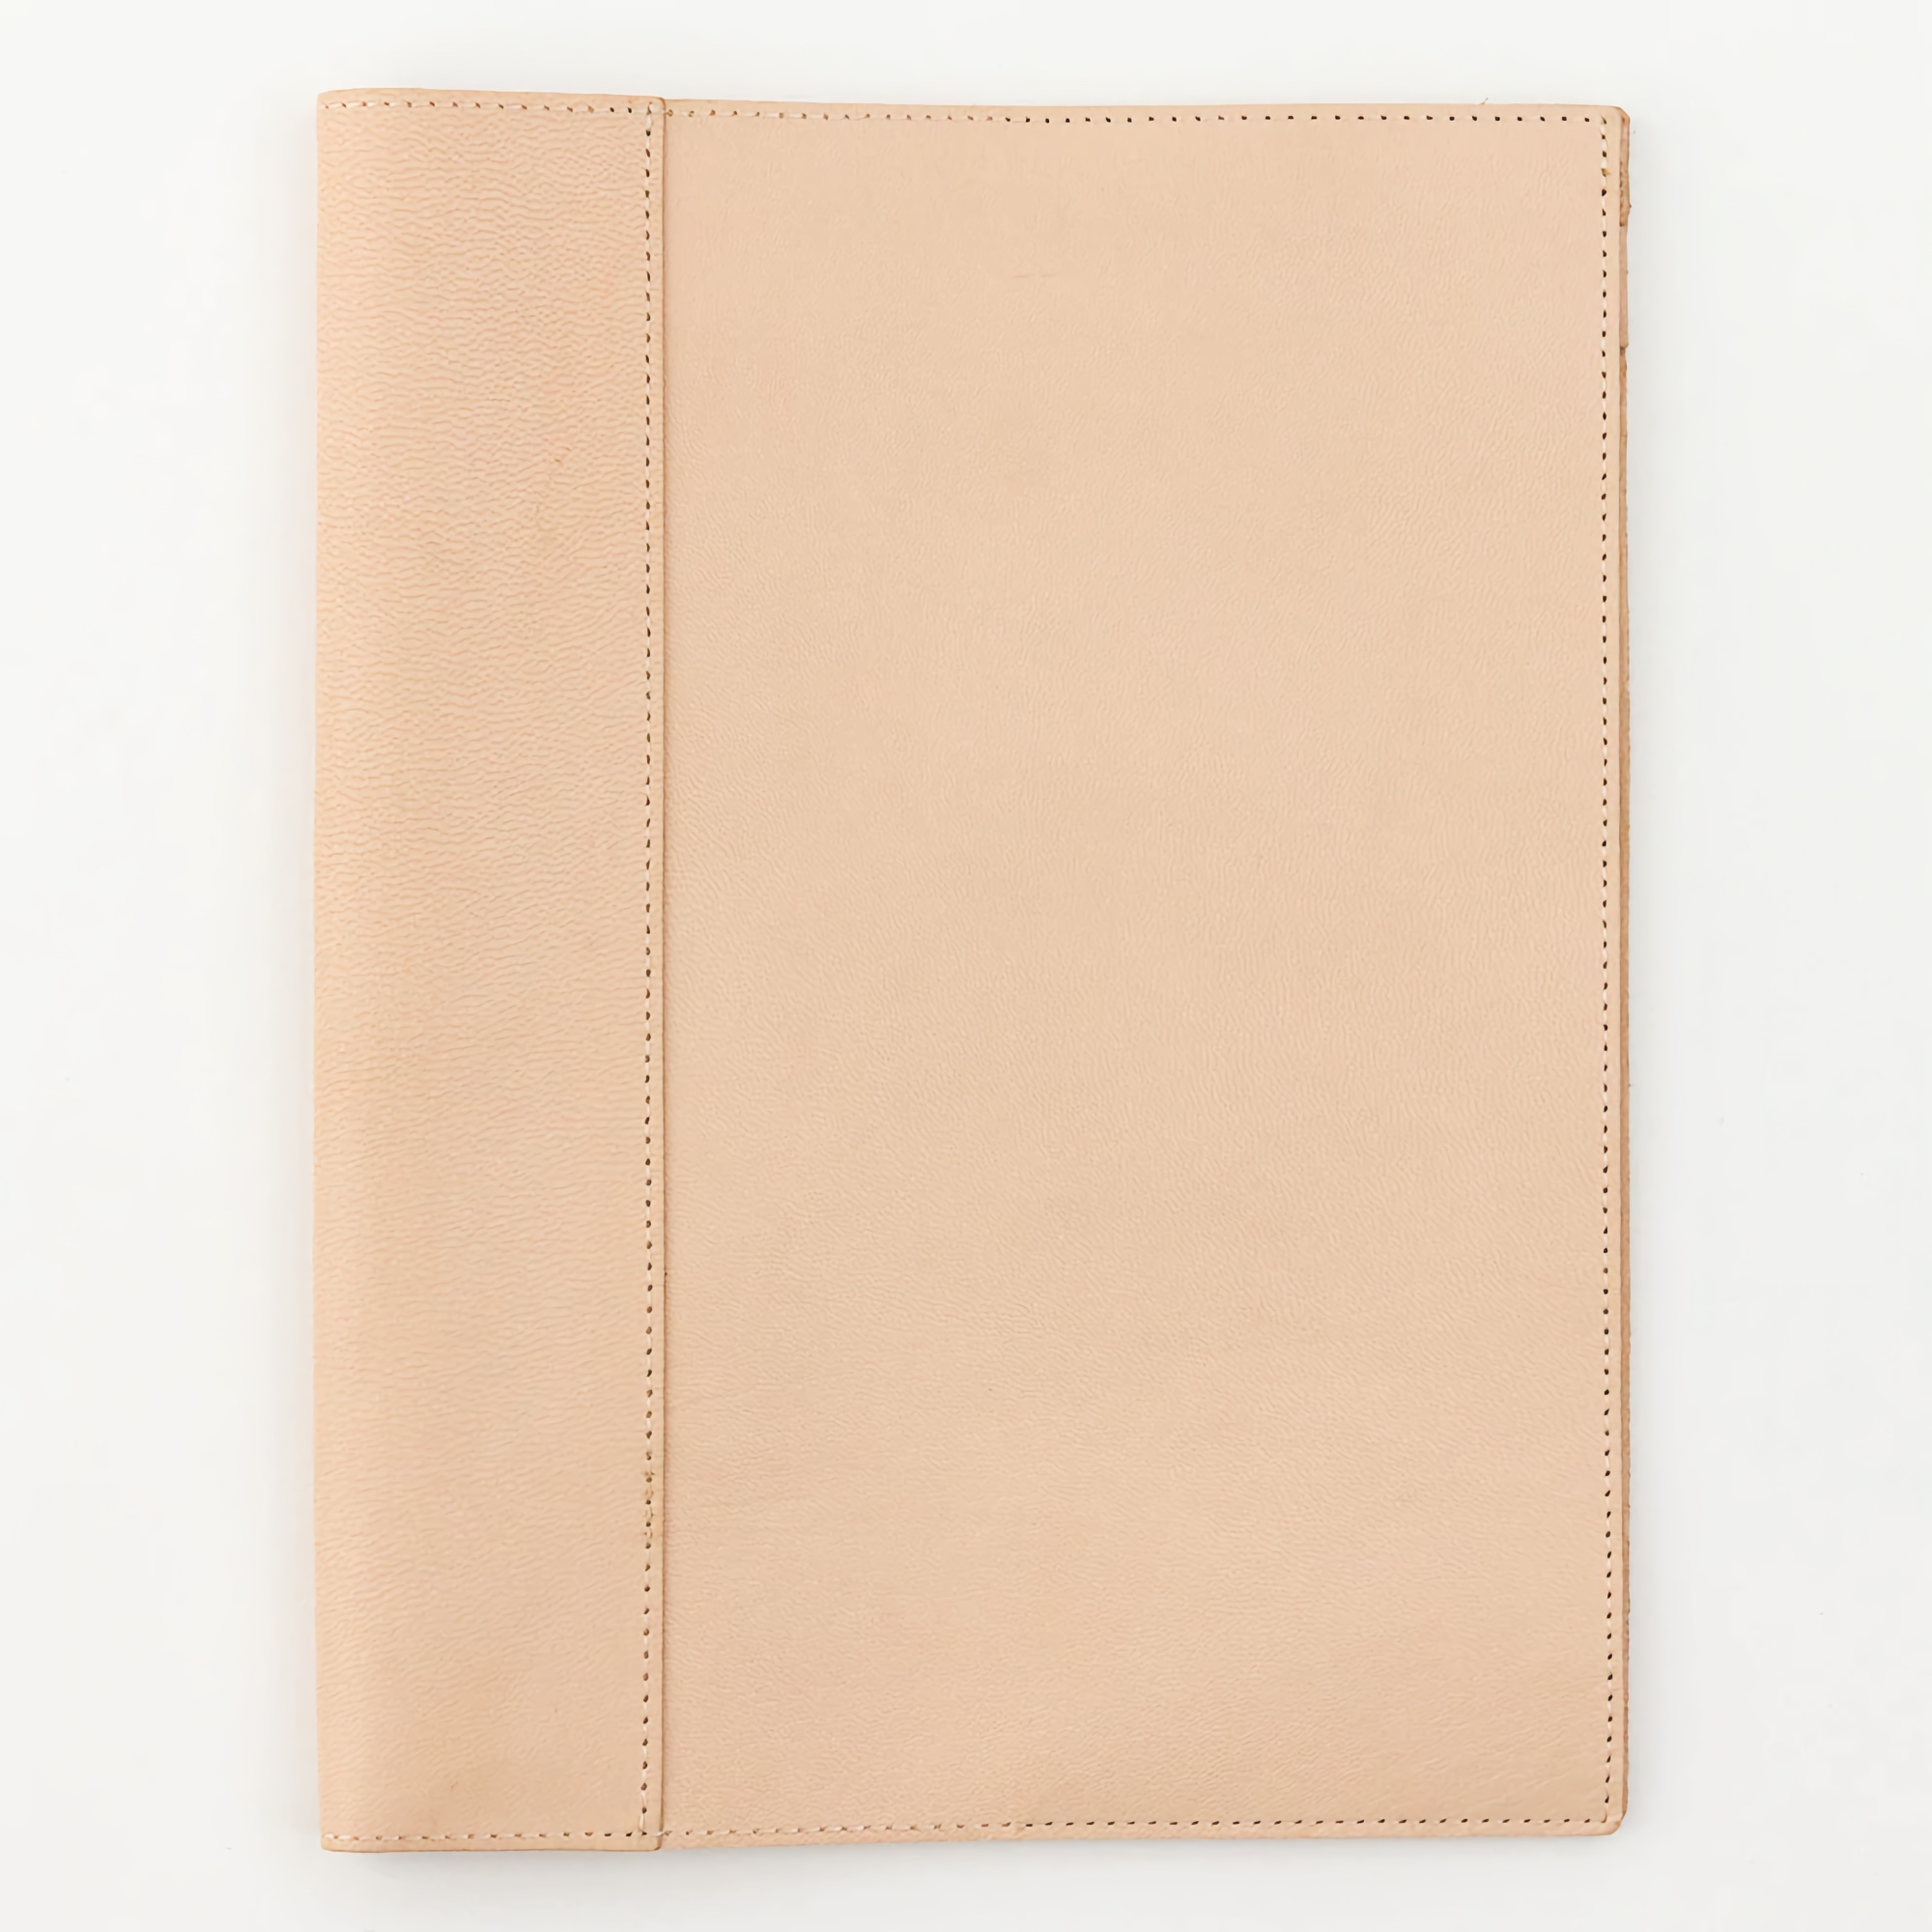 Midori MD Goat Leather Cover [A4]